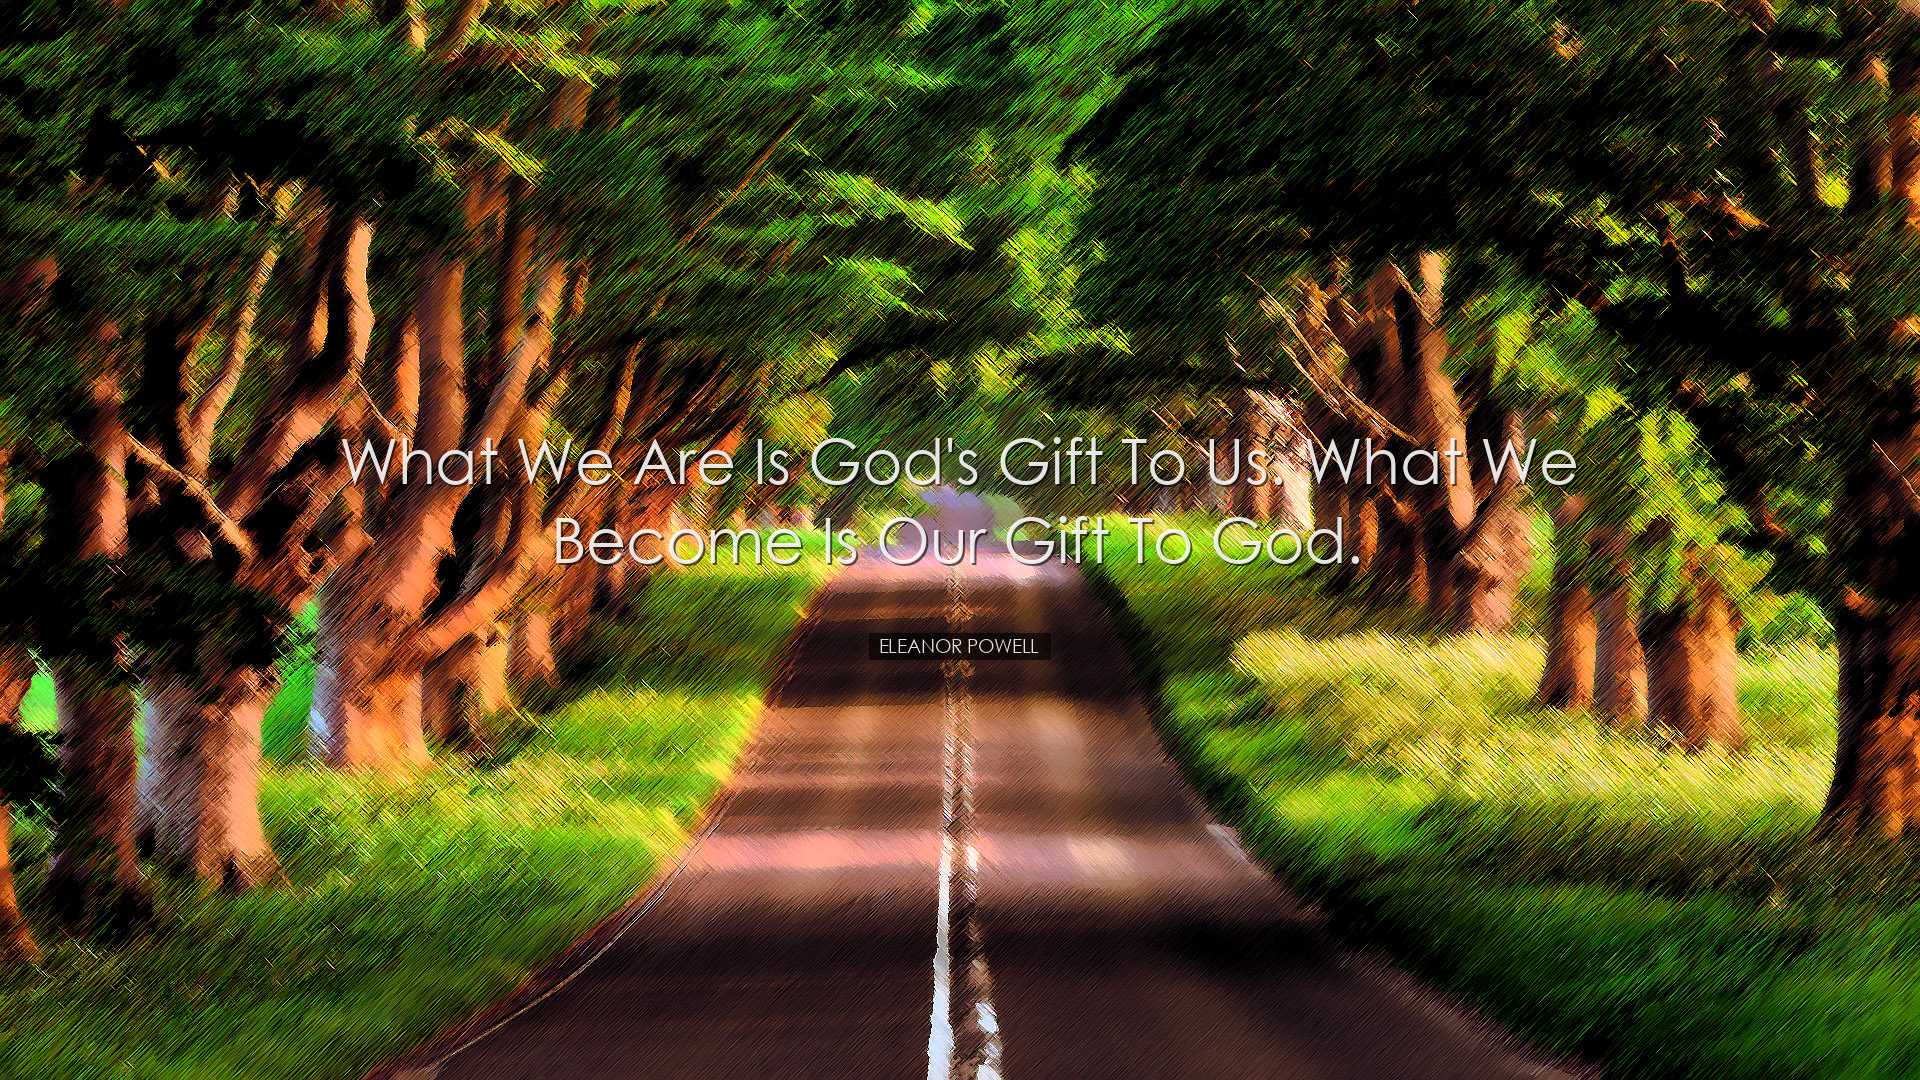 What we are is God's gift to us. What we become is our gift to God